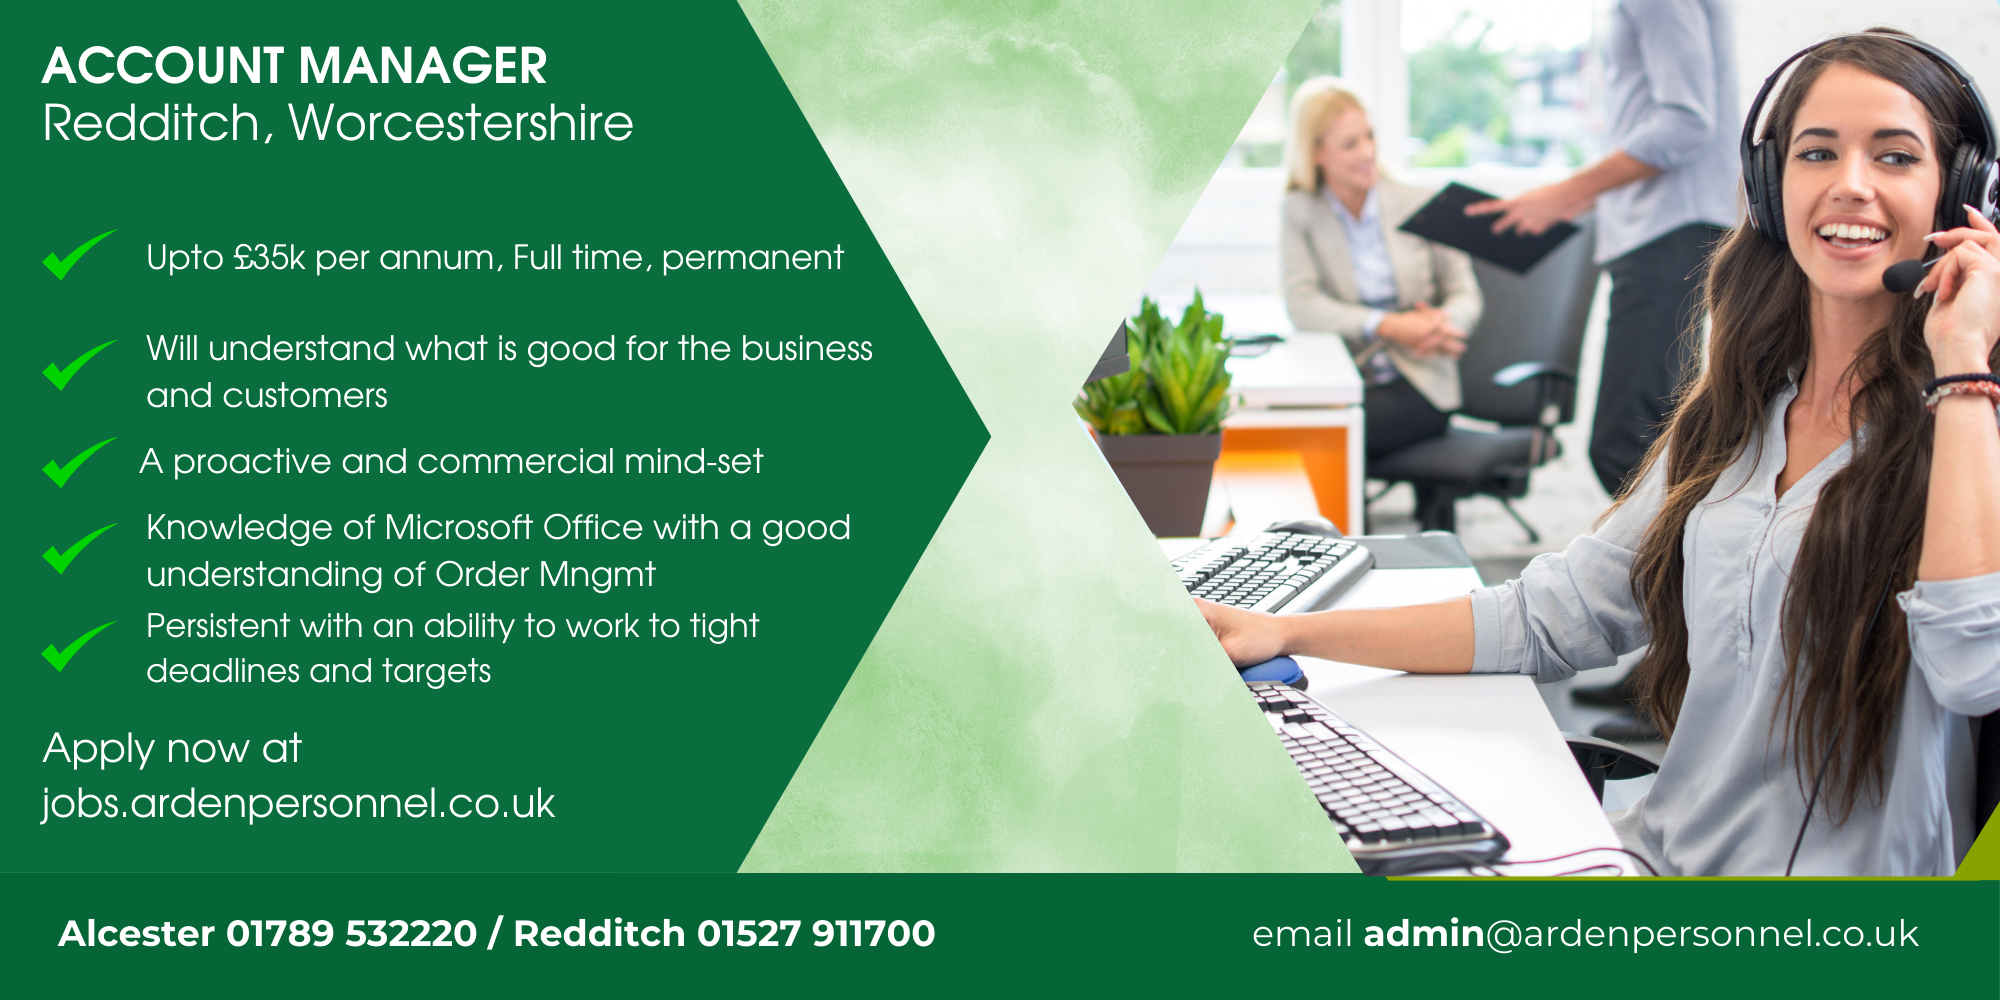 Account manager in redditch